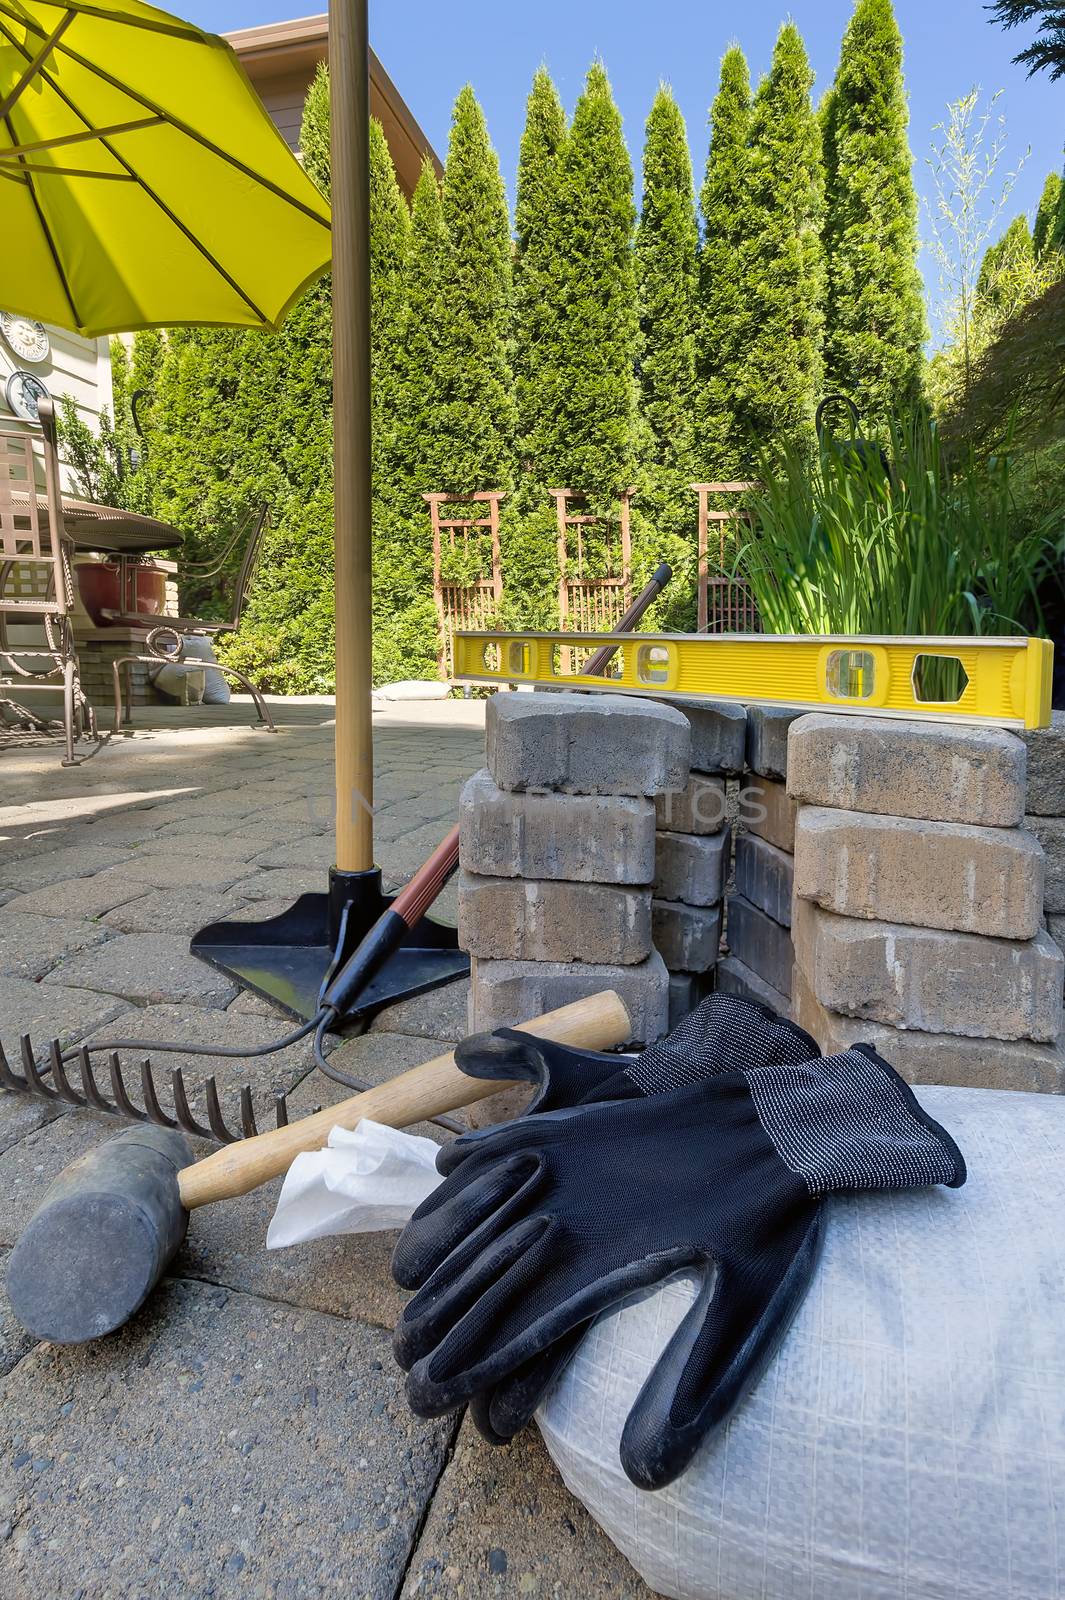 Stone Pavers and Tools for Backyard Hardscape by jpldesigns